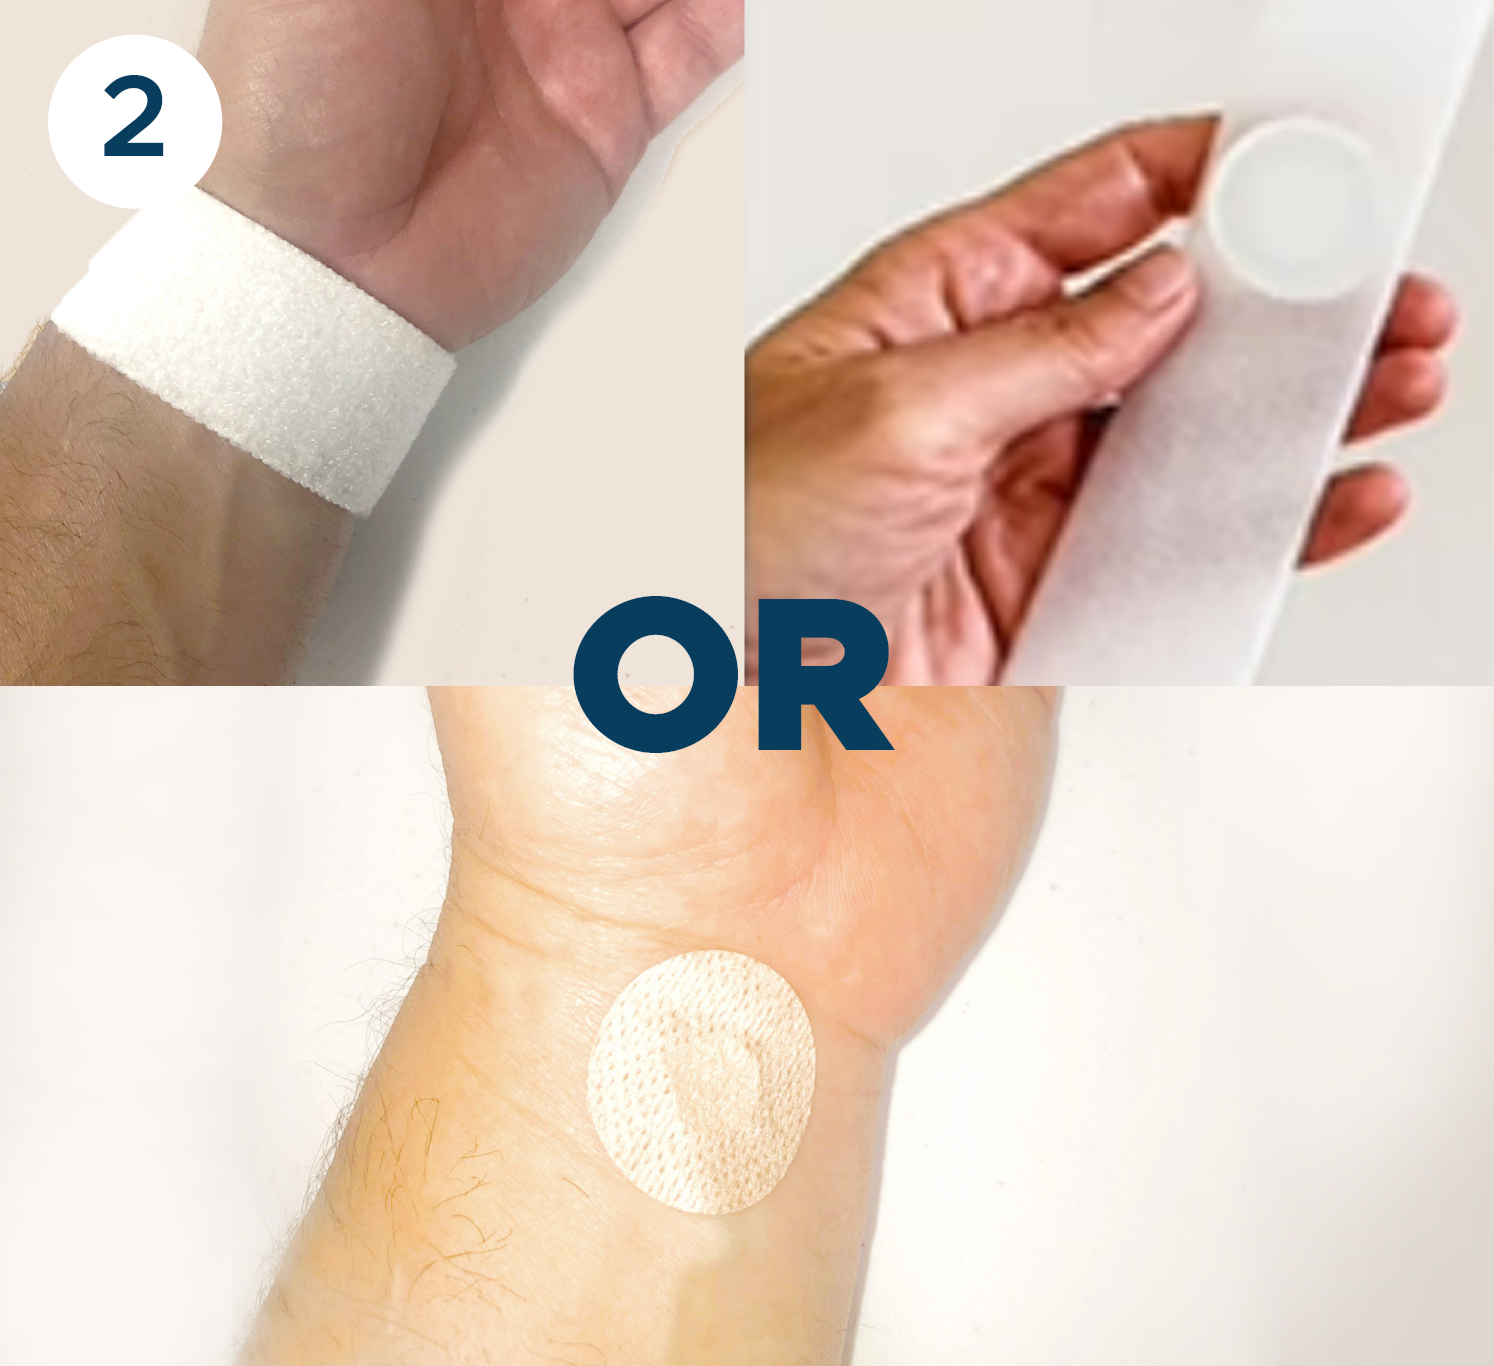 apply patch to the upper left wrist 30-60 minutes before sleeping, 